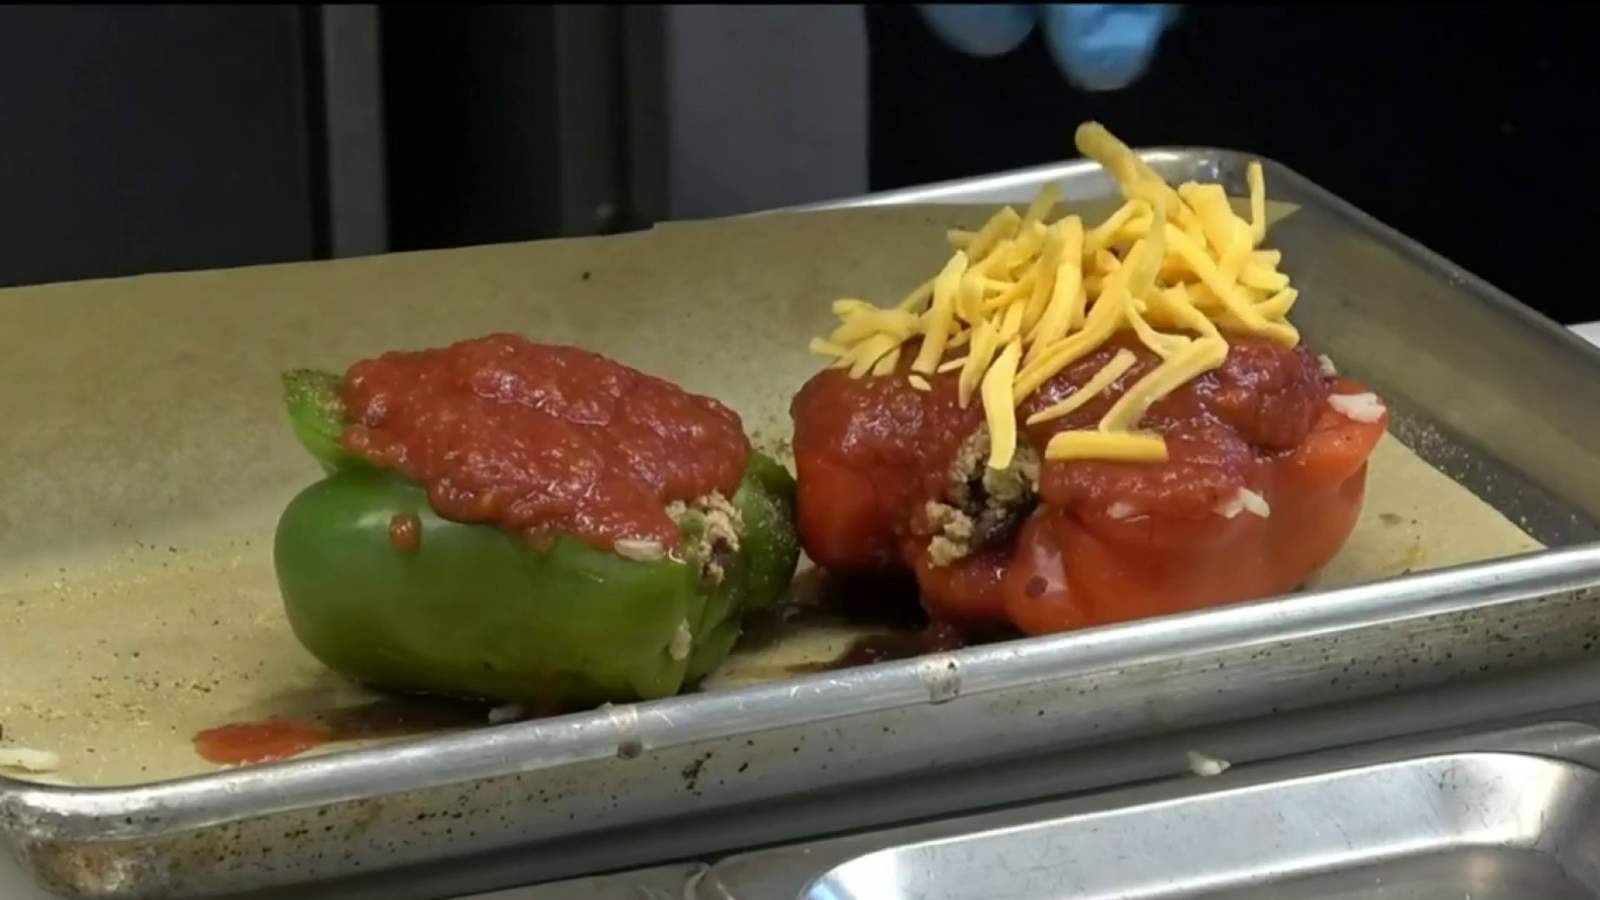 Try out stuffed peppers at The Detroit Pepper Company